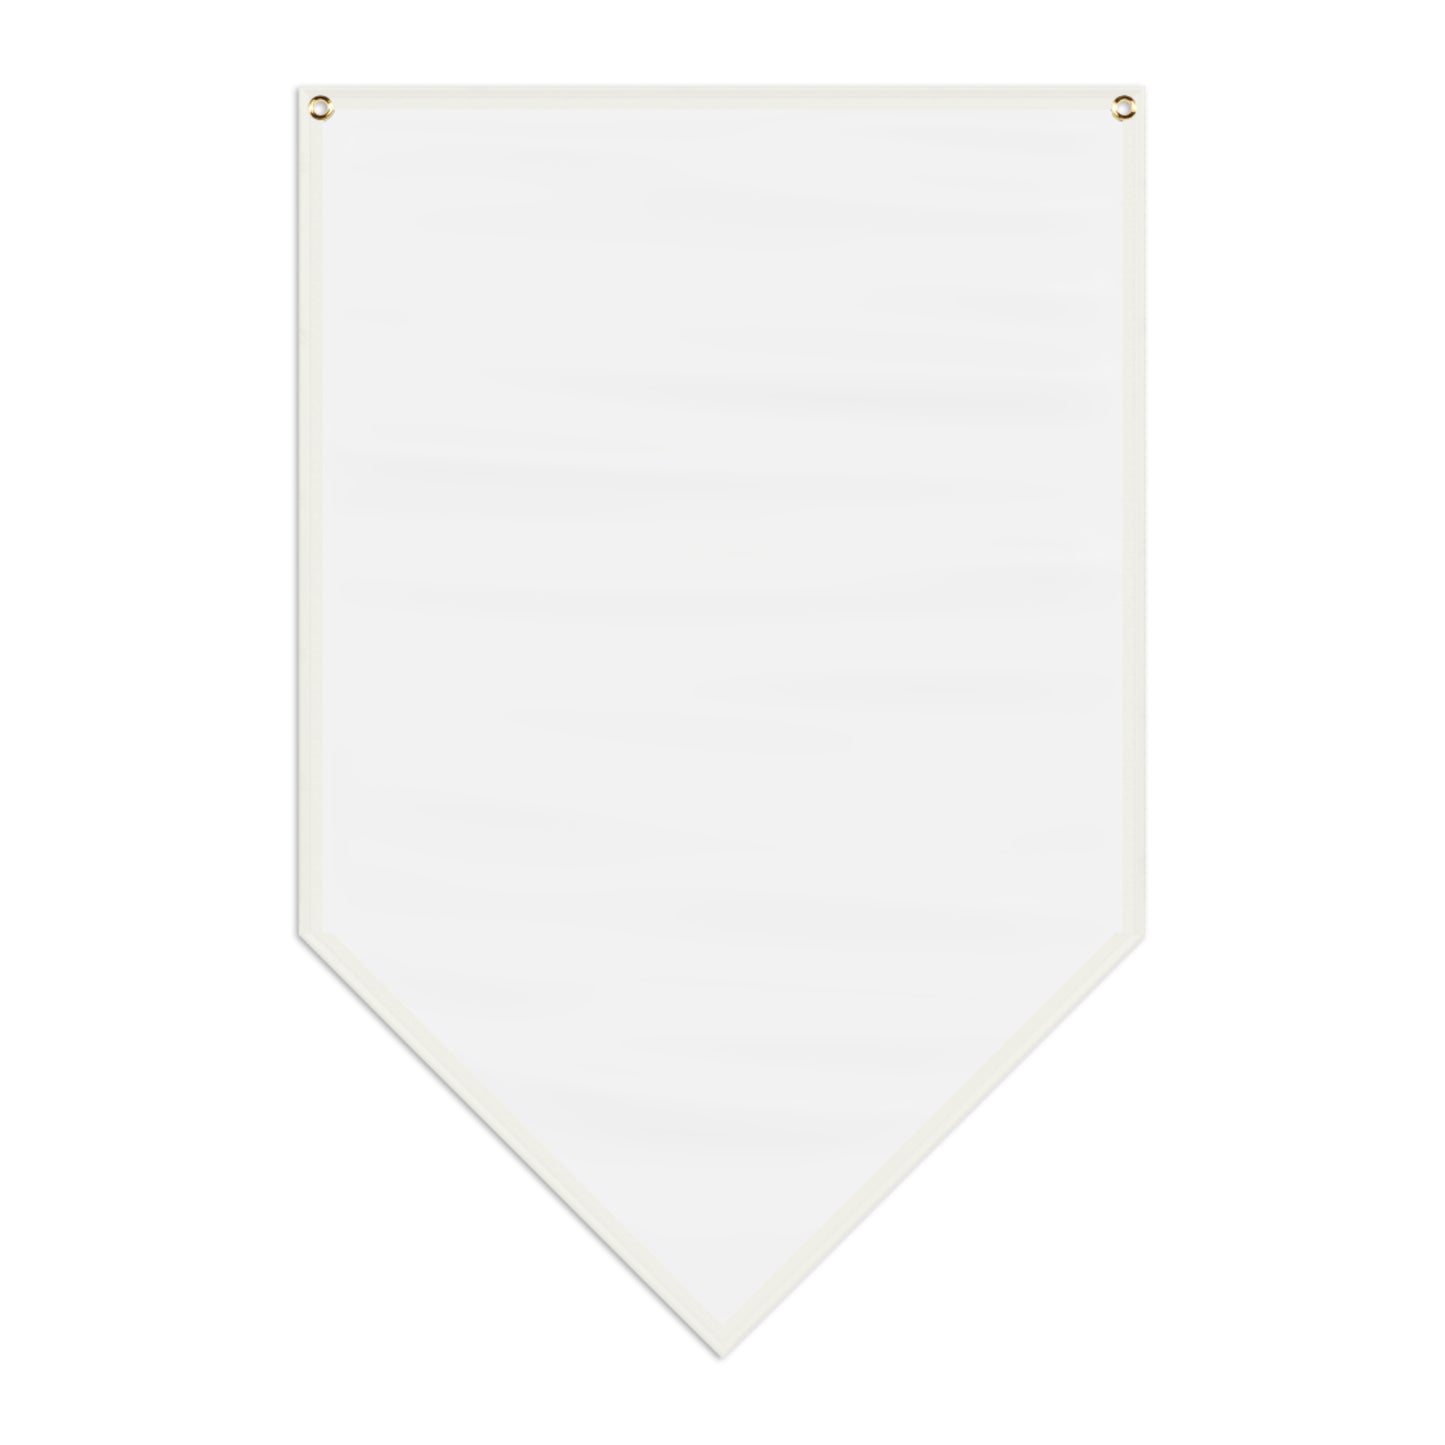 Hey Beautiful, You Got This Pennant Banner